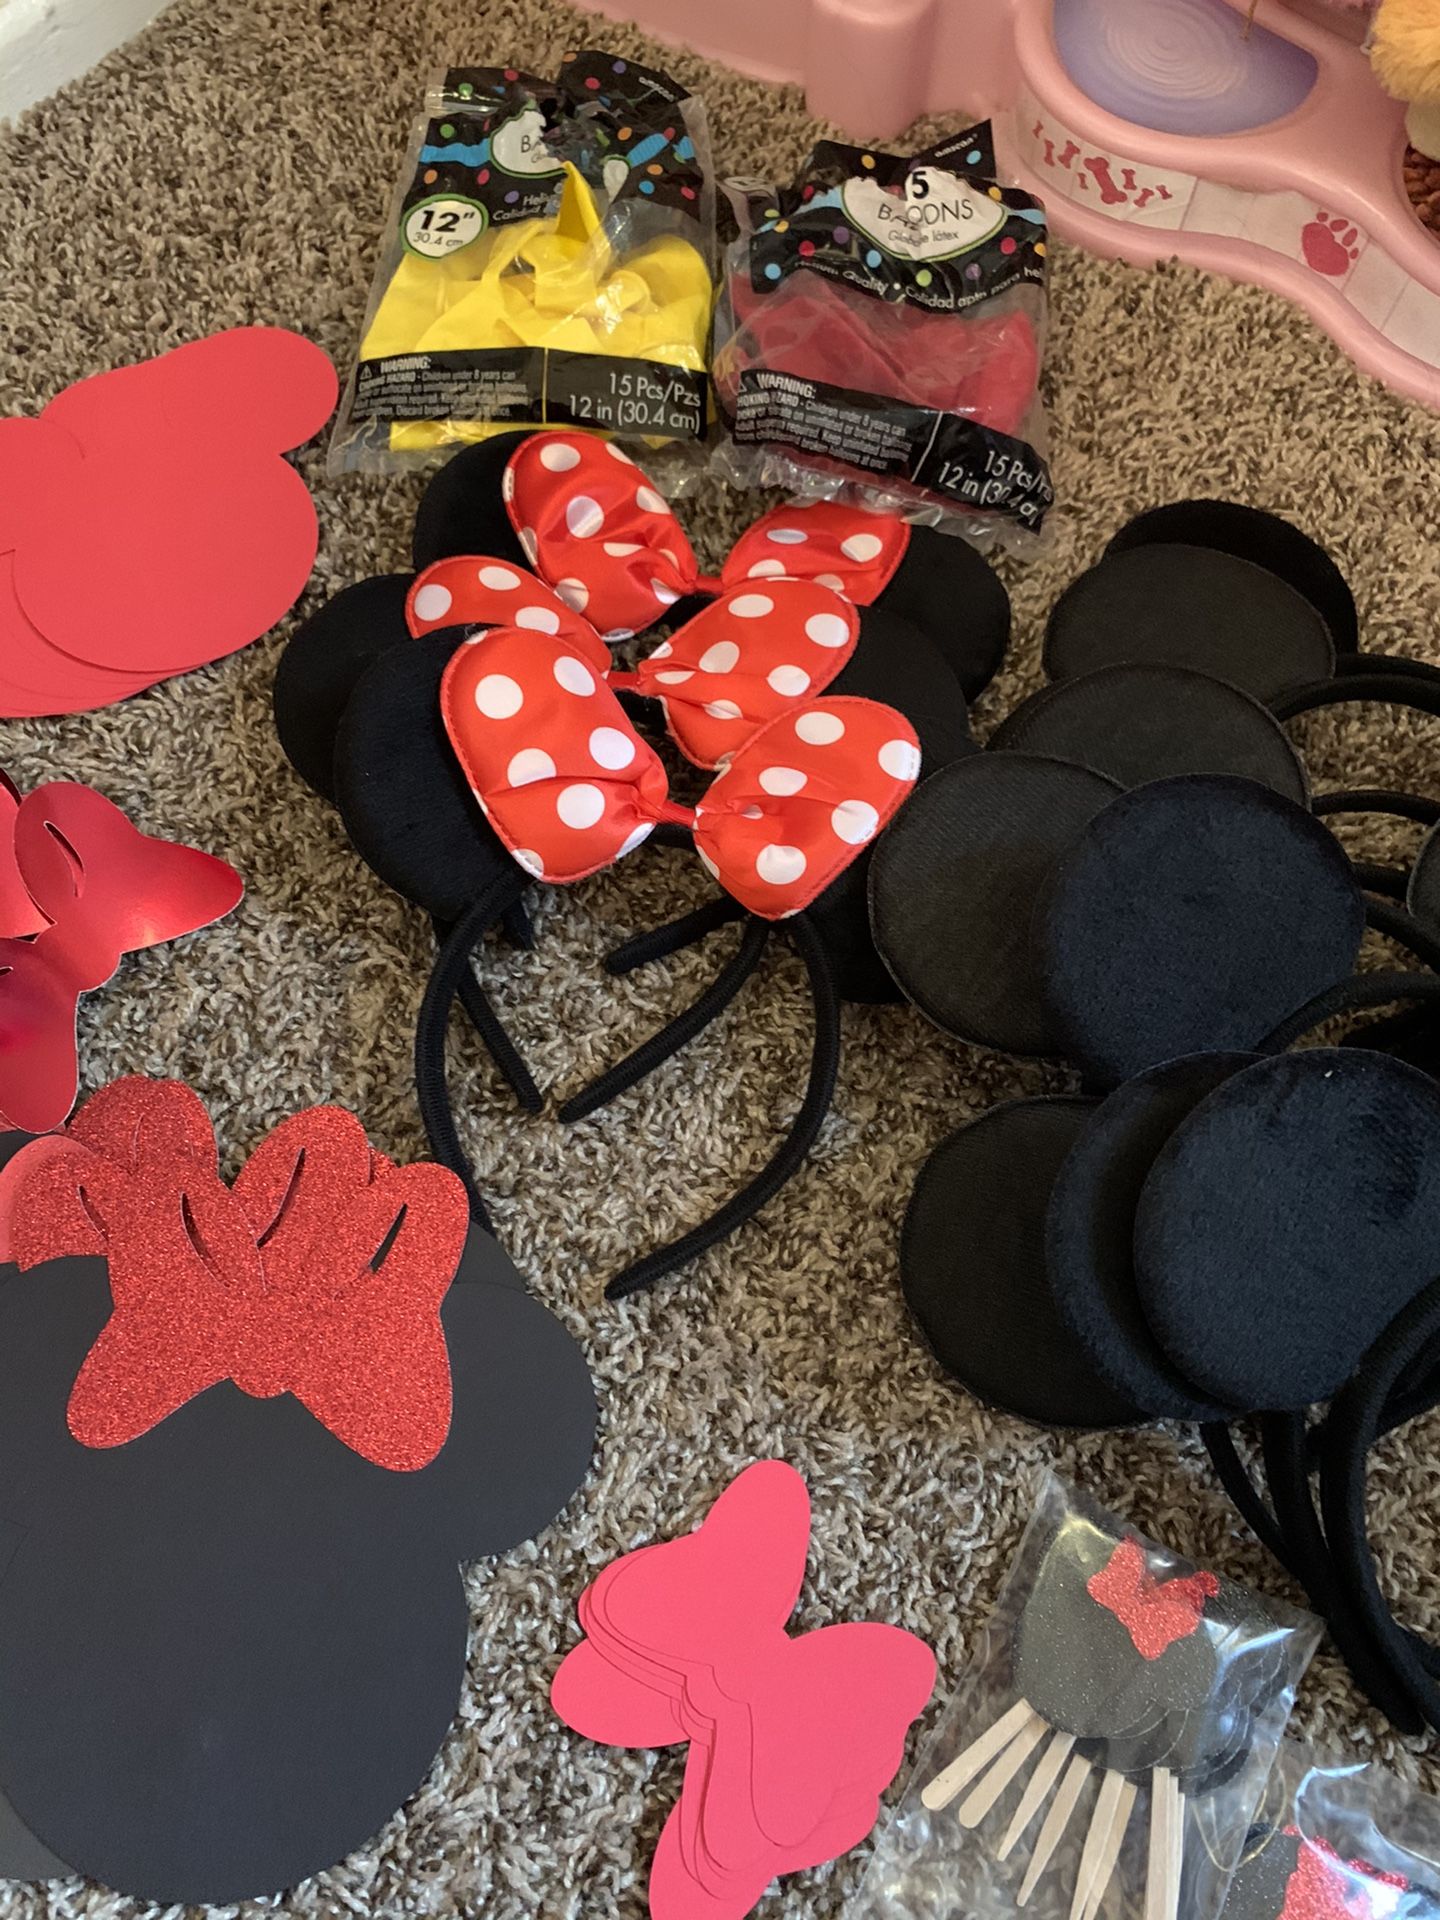 Minnie Mouse party decorations